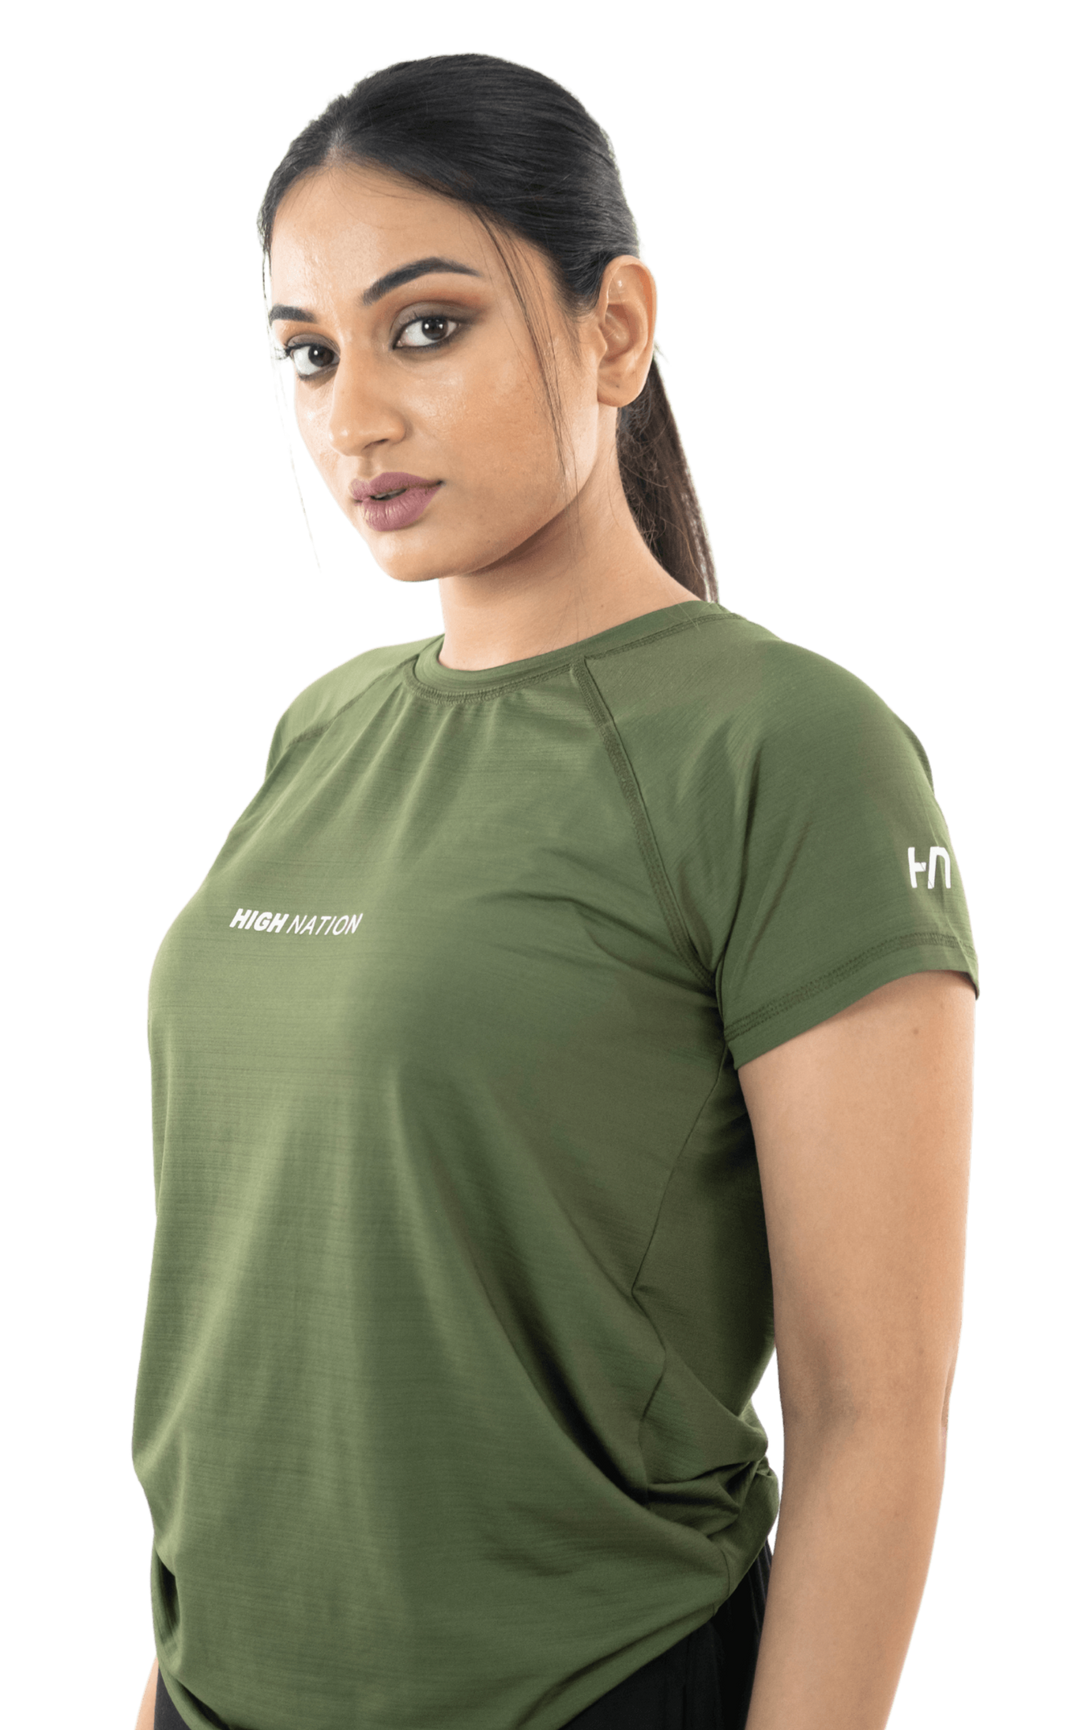 SOuLL Active Olive Green Half Sleeves T-Shirt - HNAthleisure